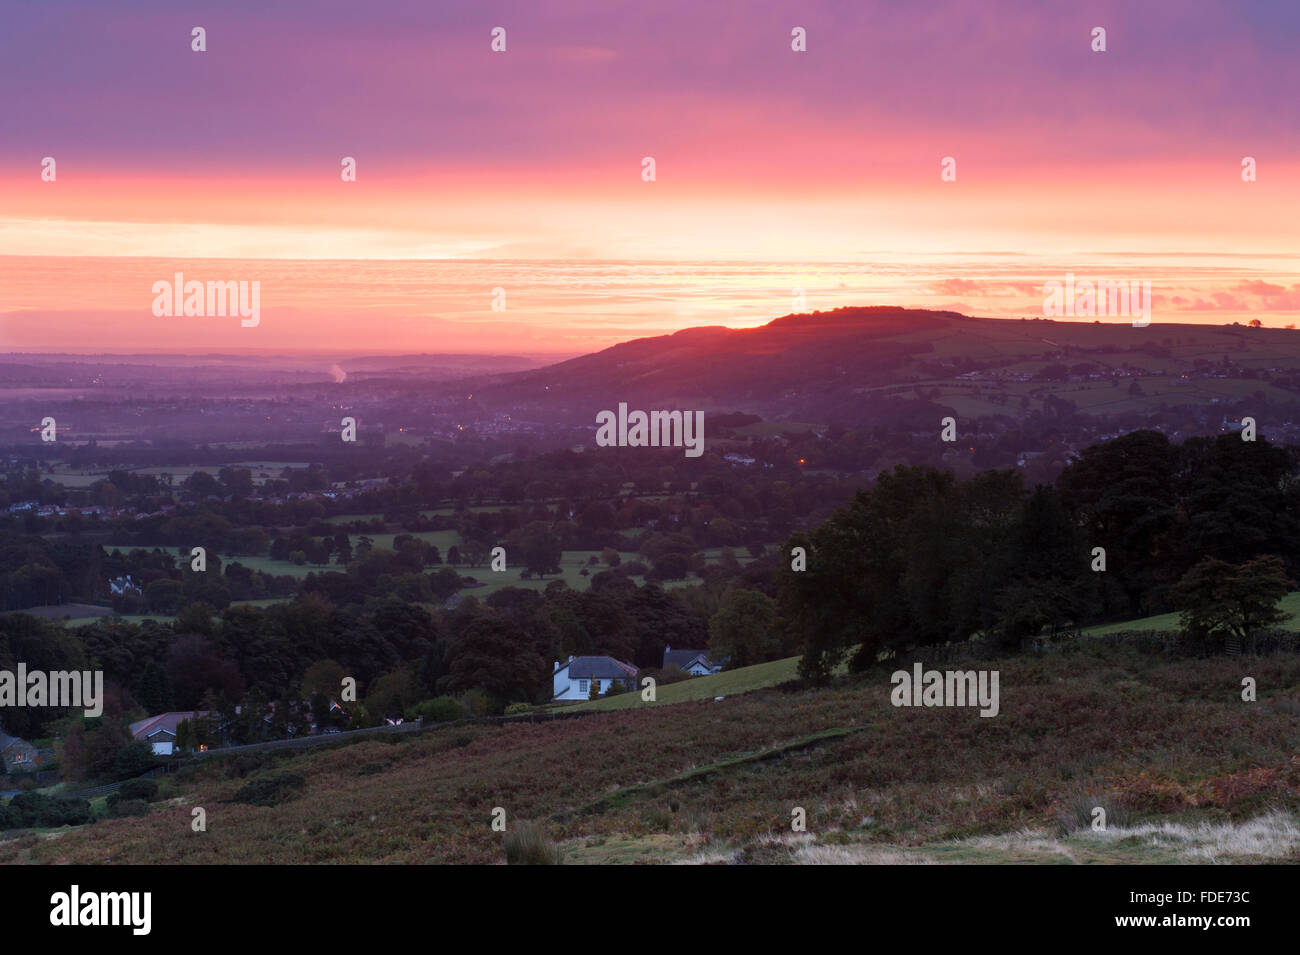 Long distance view over the Wharfe Valley, Yorkshire, England, GB, UK, from high on Burley Moor at sunrise, with a dramatic pink, red and orange sky. Stock Photo